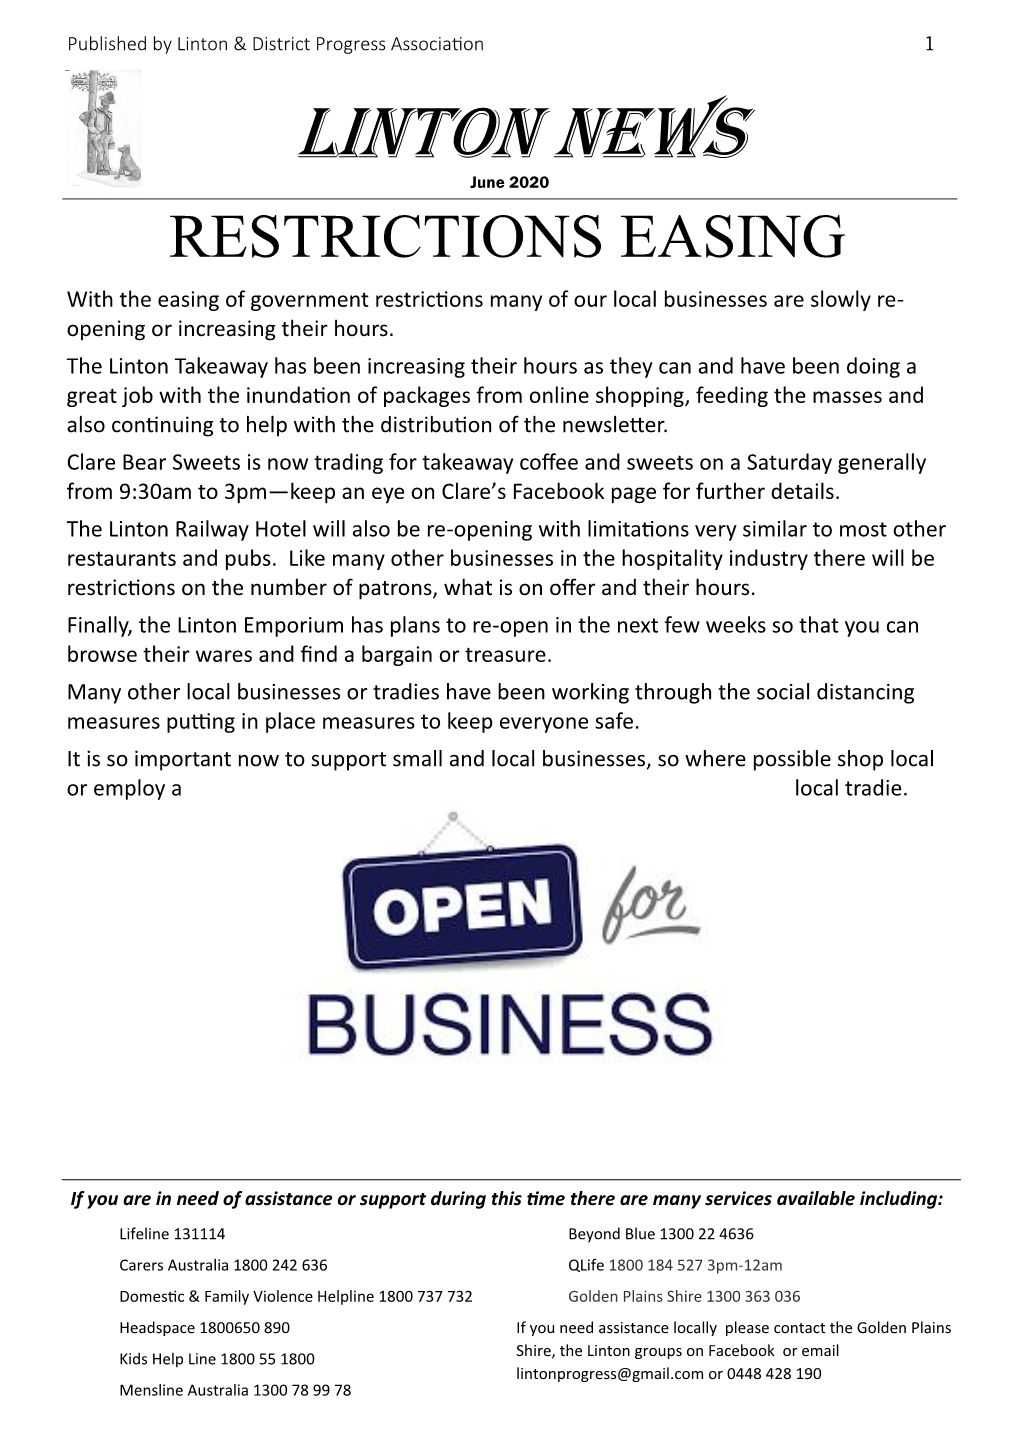 LINTON News June 2020 RESTRICTIONS EASING with the Easing of Government Restrictions Many of Our Local Businesses Are Slowly Re- Opening Or Increasing Their Hours